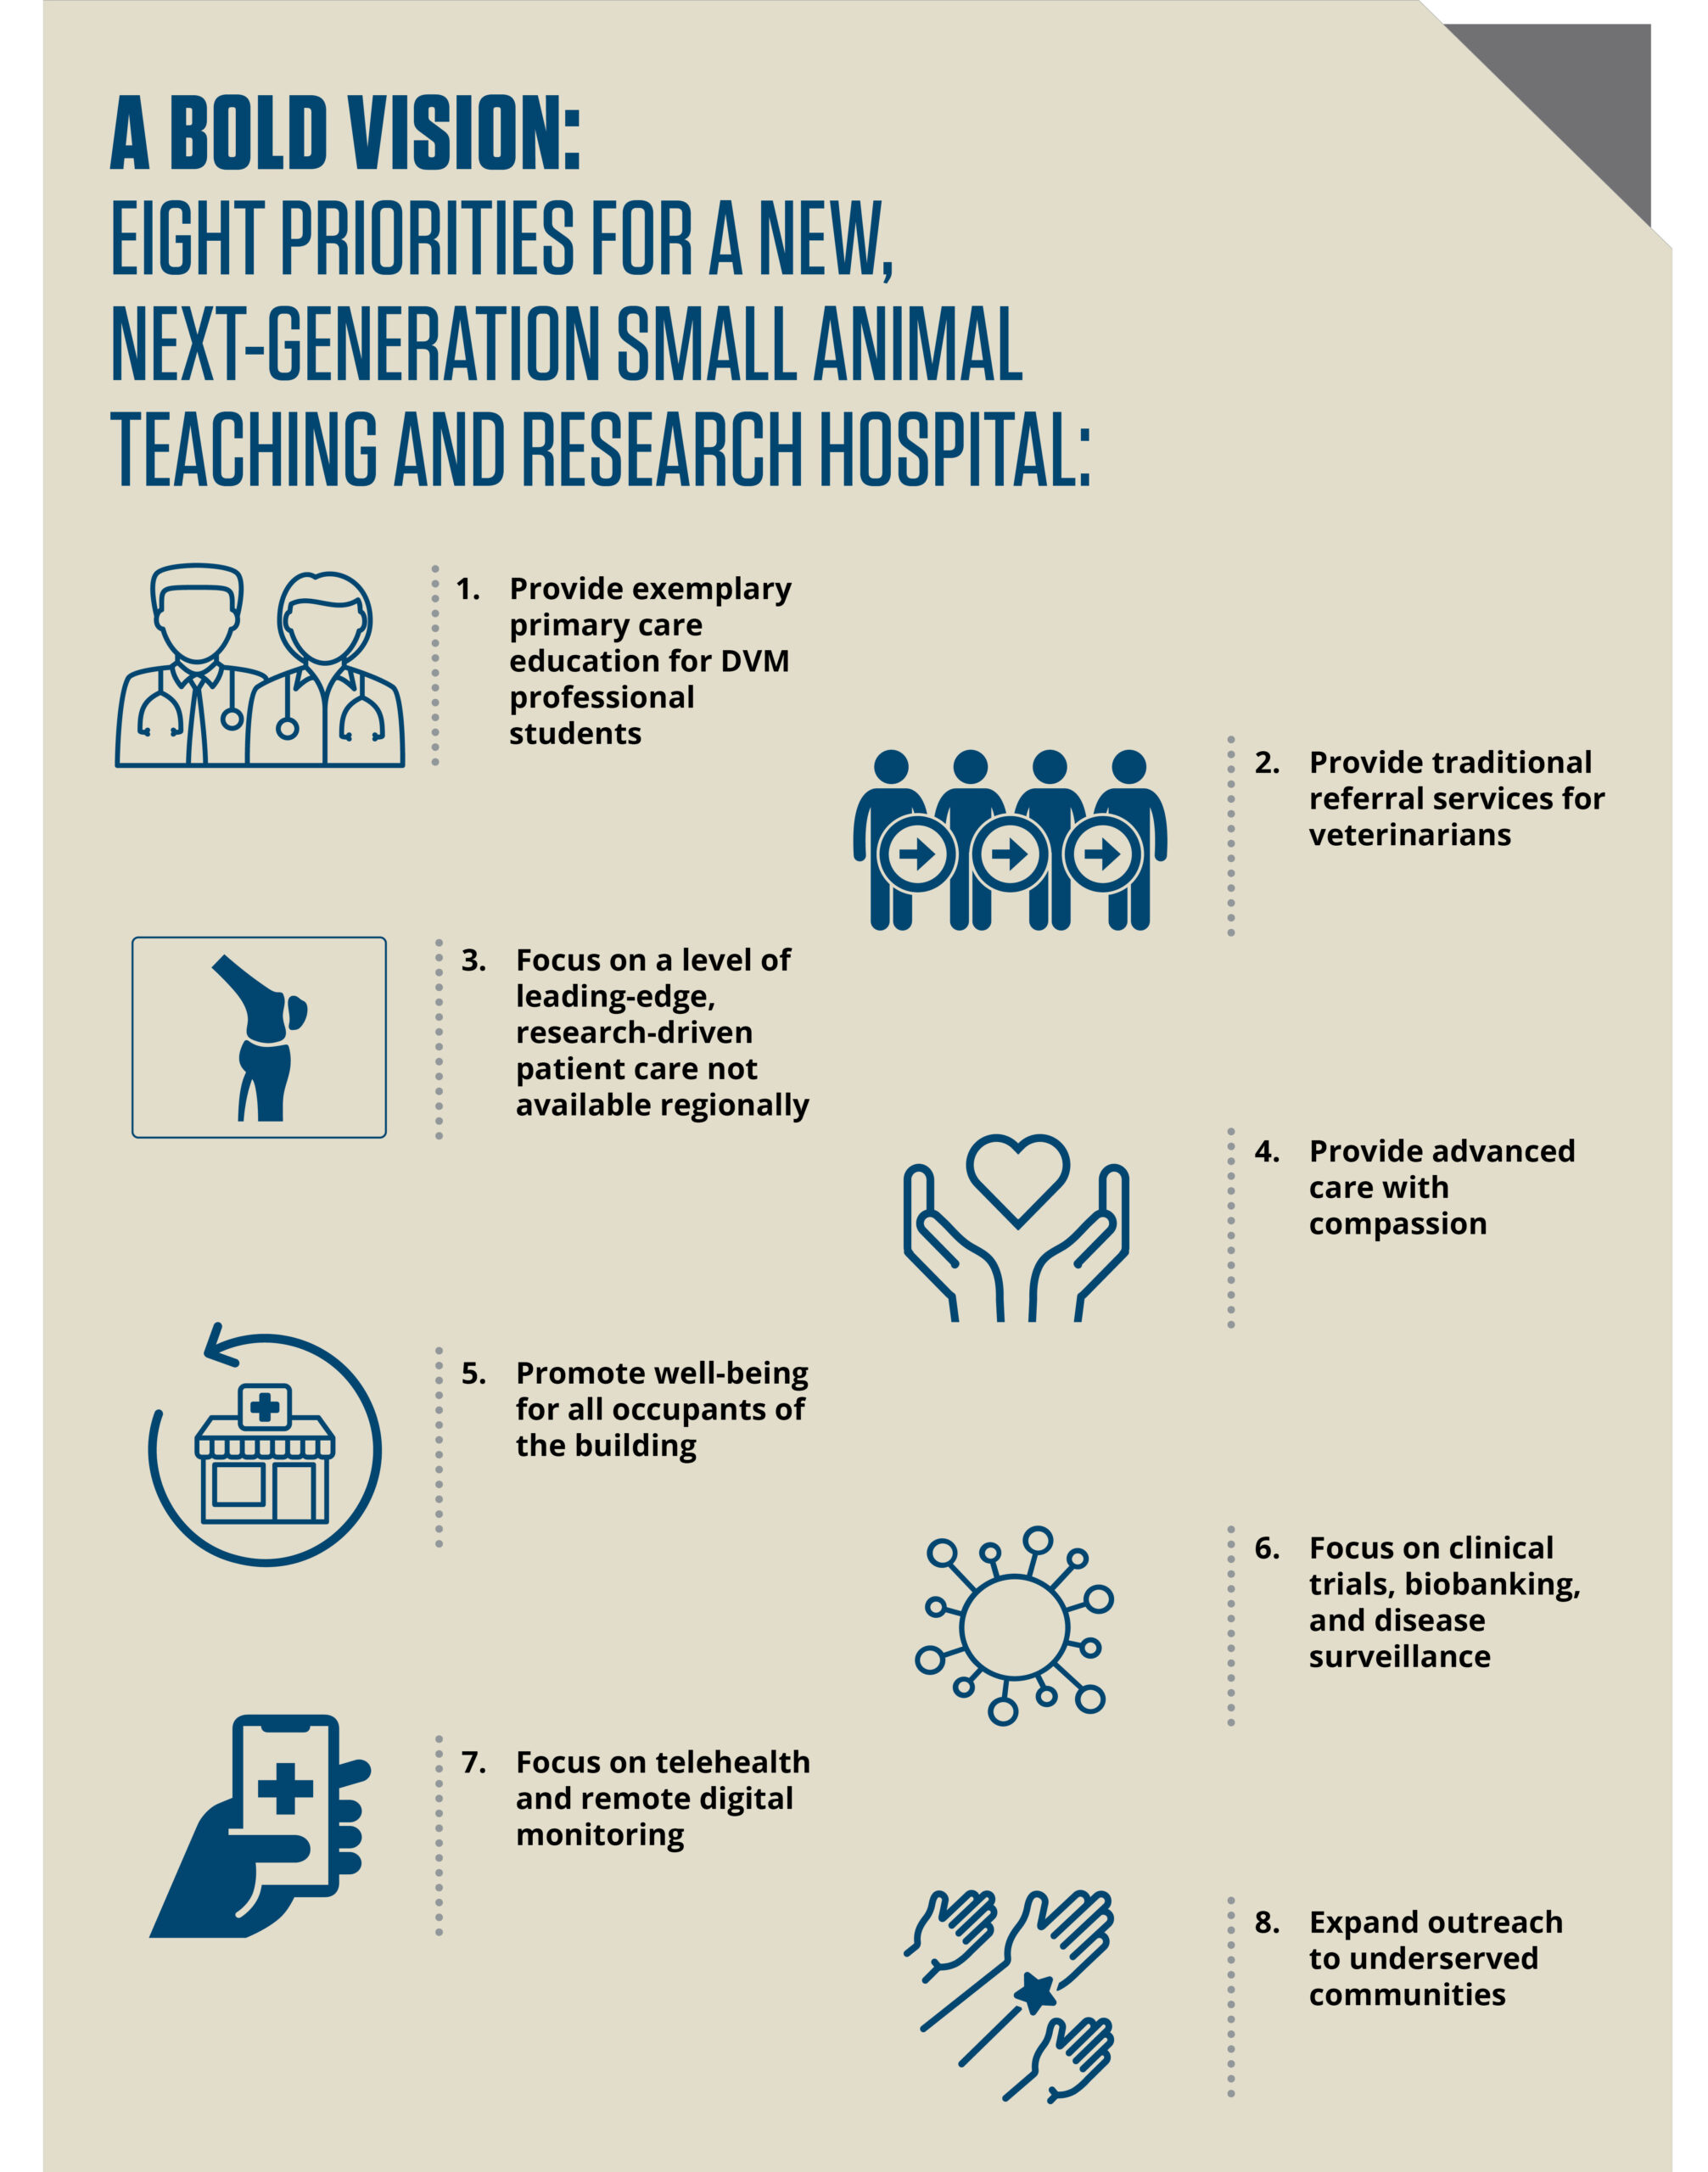 EIGHT PRIORITIES FOR A NEW, NEXT-GENERATION SMALL ANIMAL TEACHING AND RESEARCH HOSPITAL